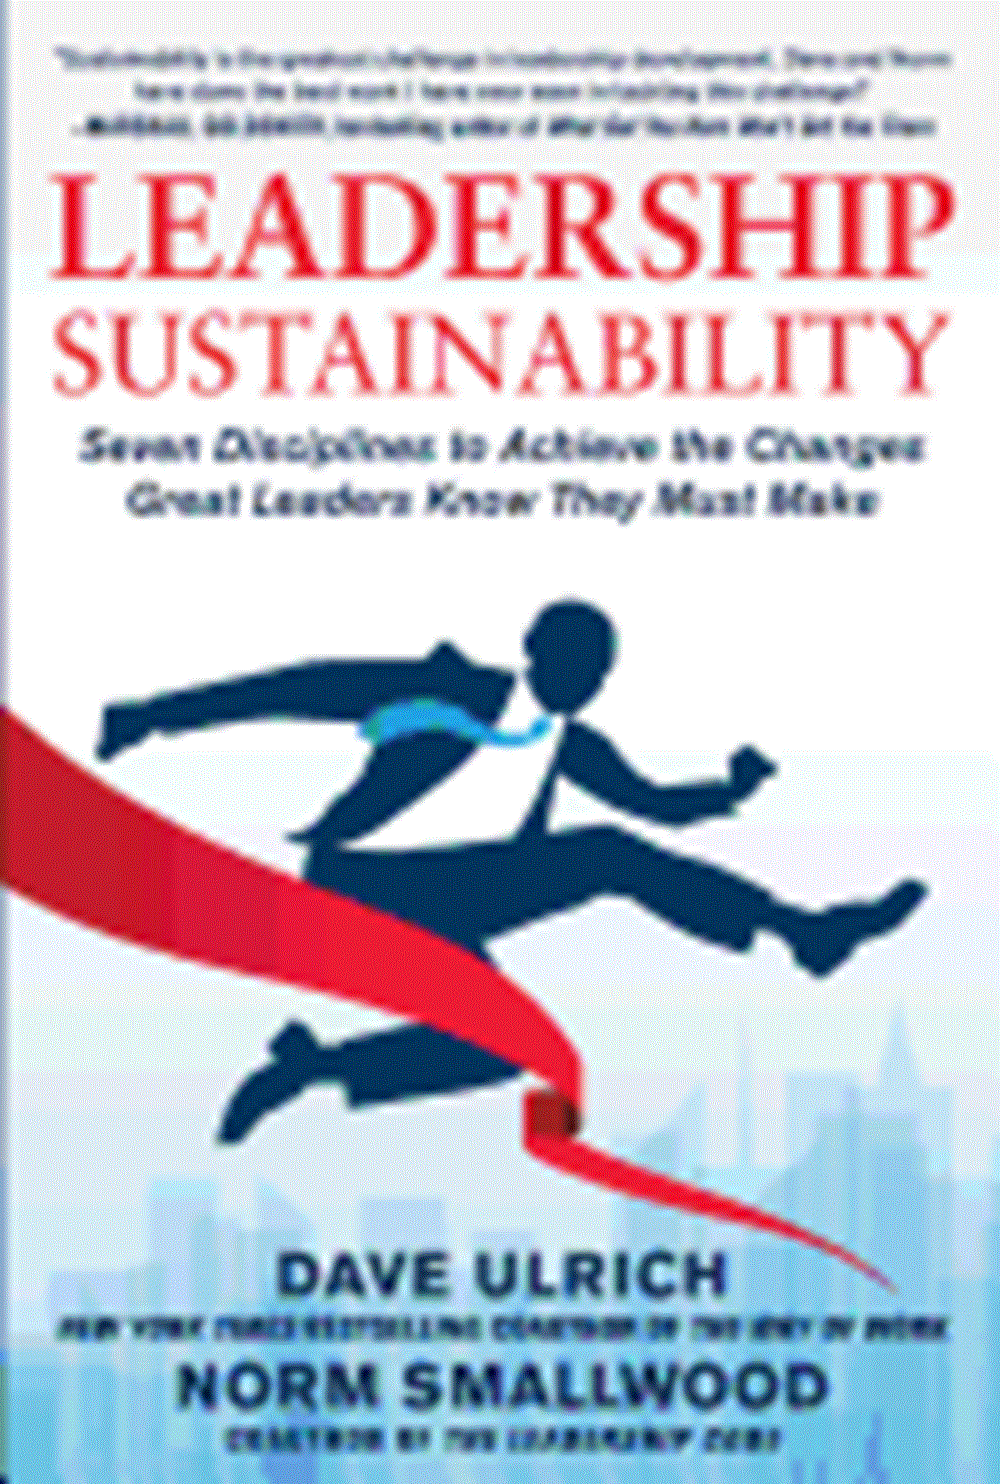 Leadership Sustainability Seven Disciplines to Achieve the Changes Great Leaders Know They Must Make